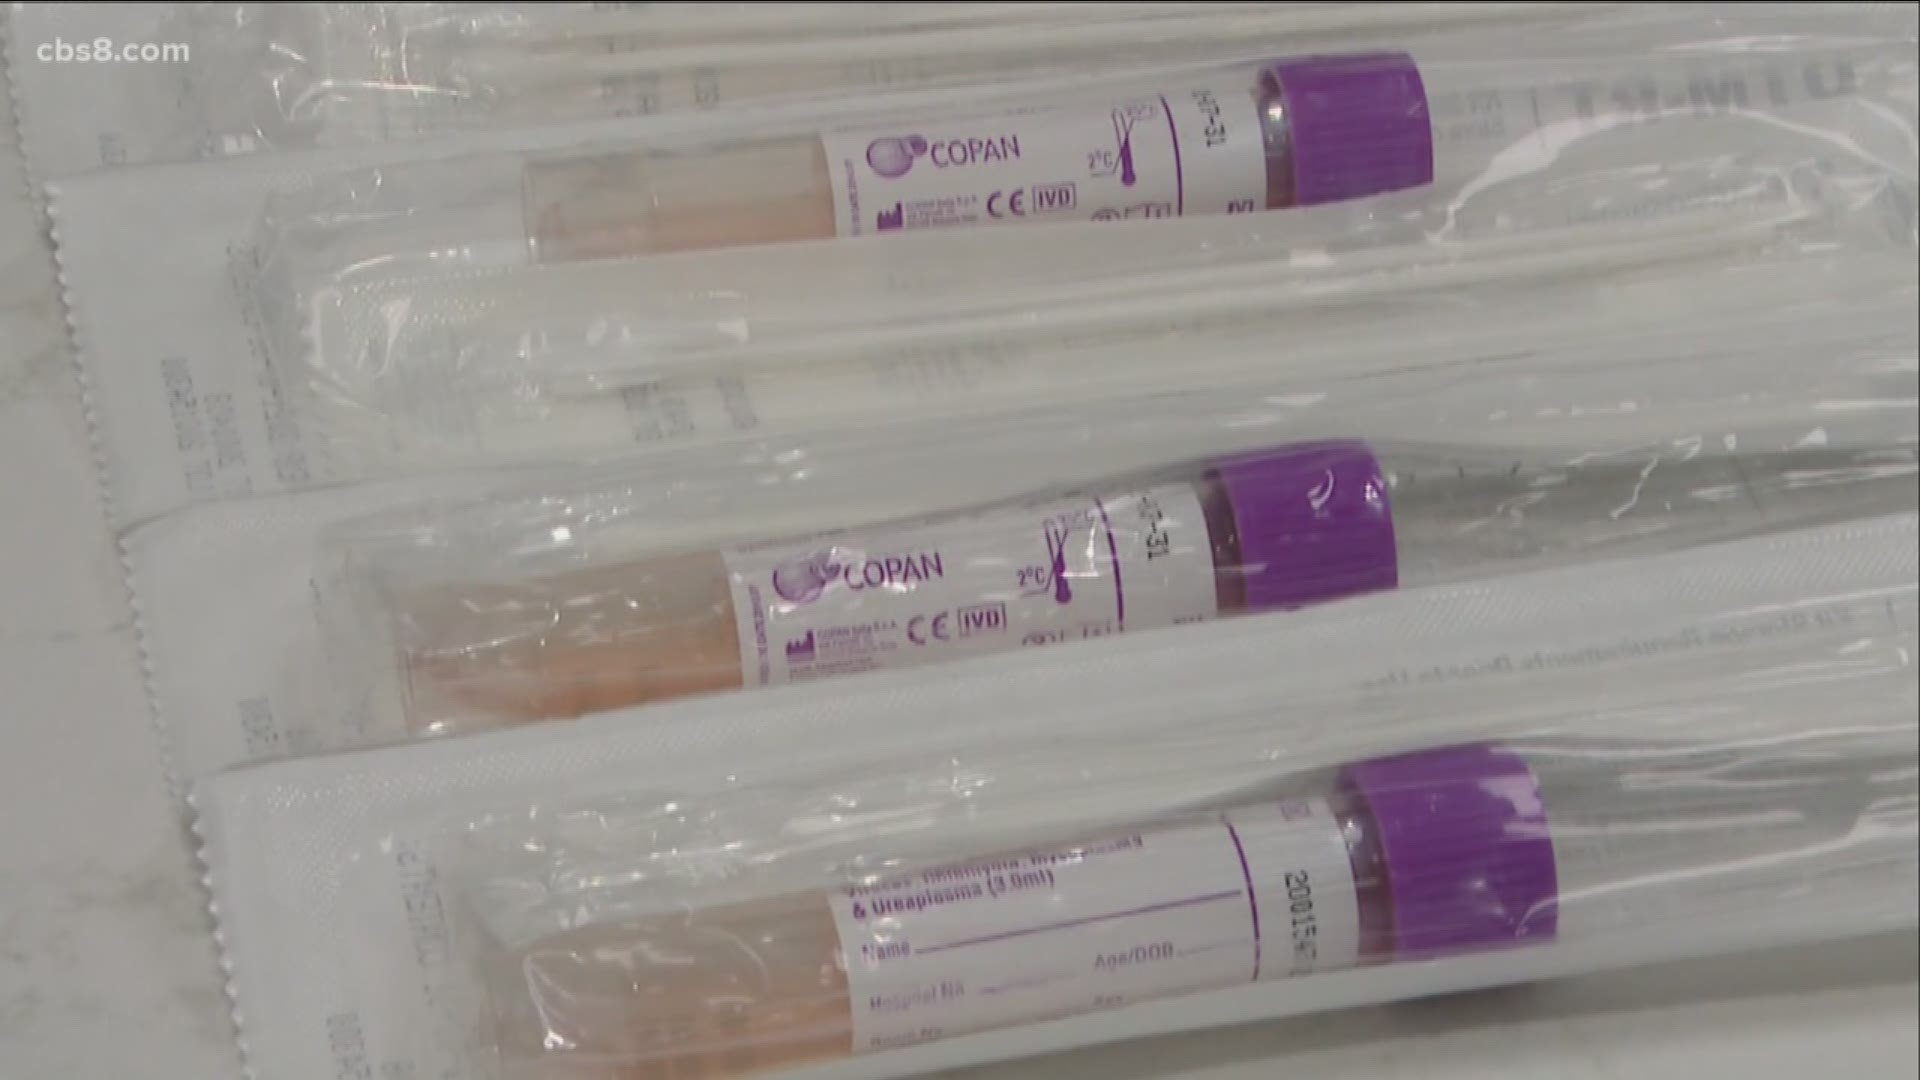 Anxiety and confusion over who can get tested for coronavirus